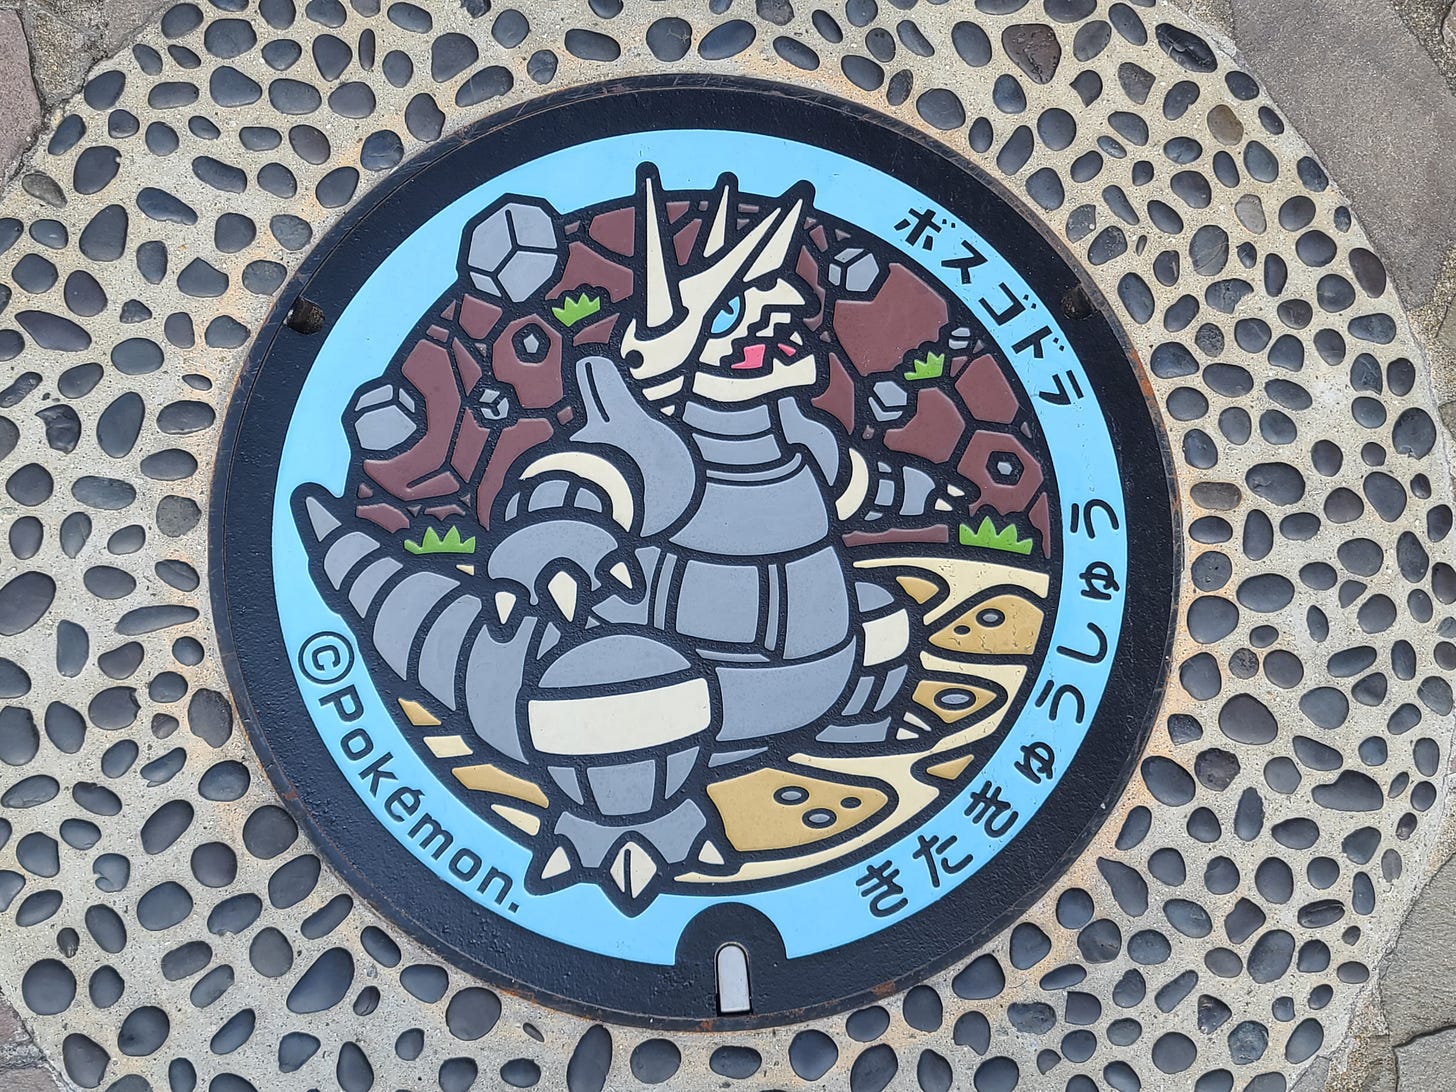 This Pokélid featuring Aggron is one many utility hole covers found around Japan